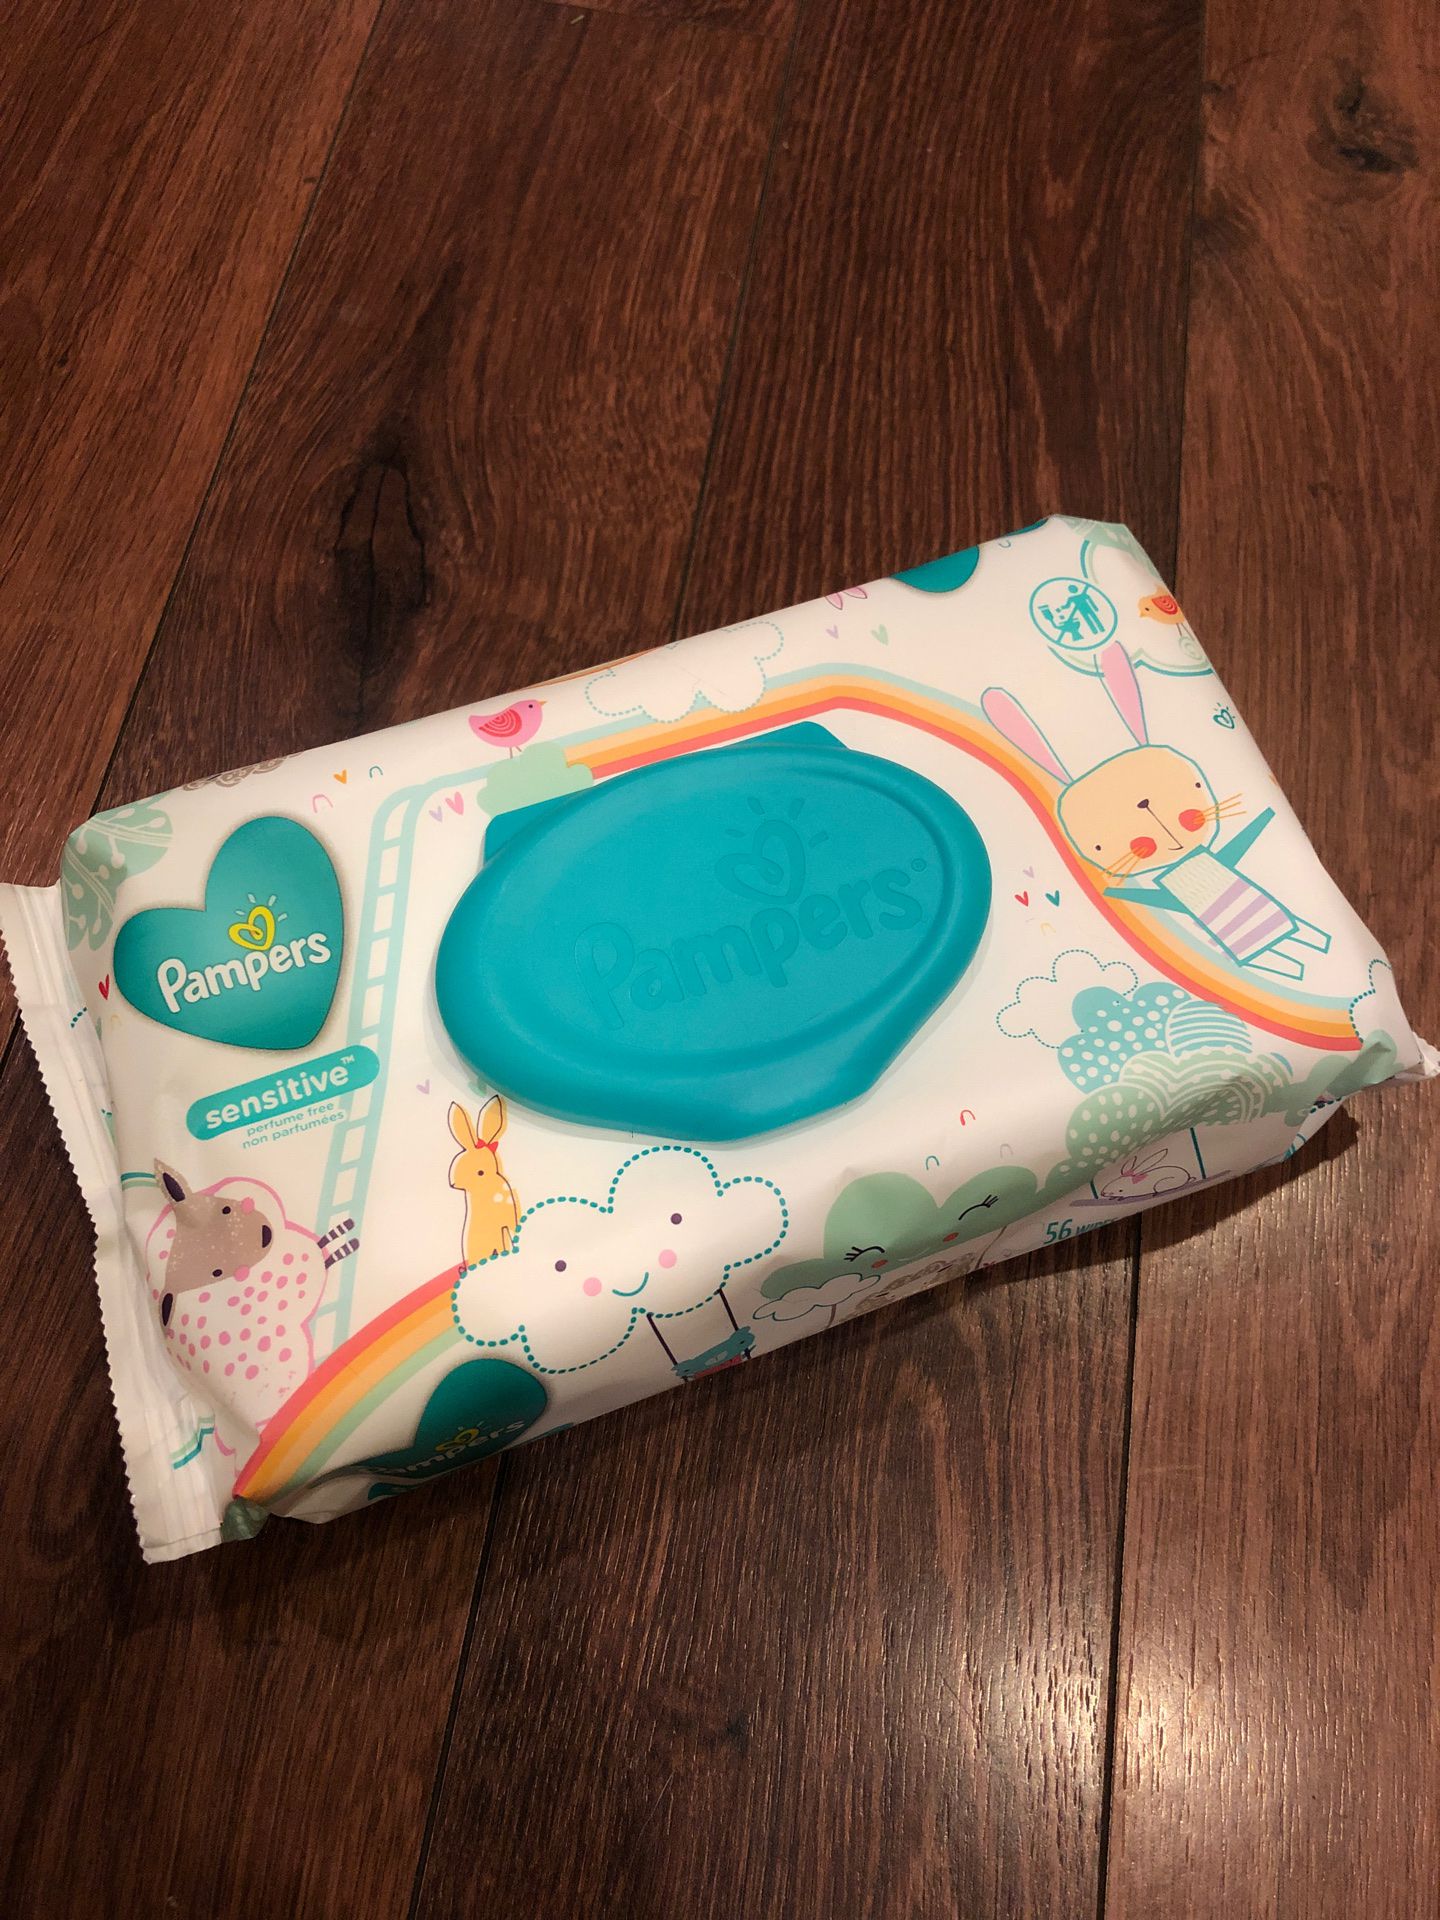 New Pampers sensitive wipes free with $25 purchase